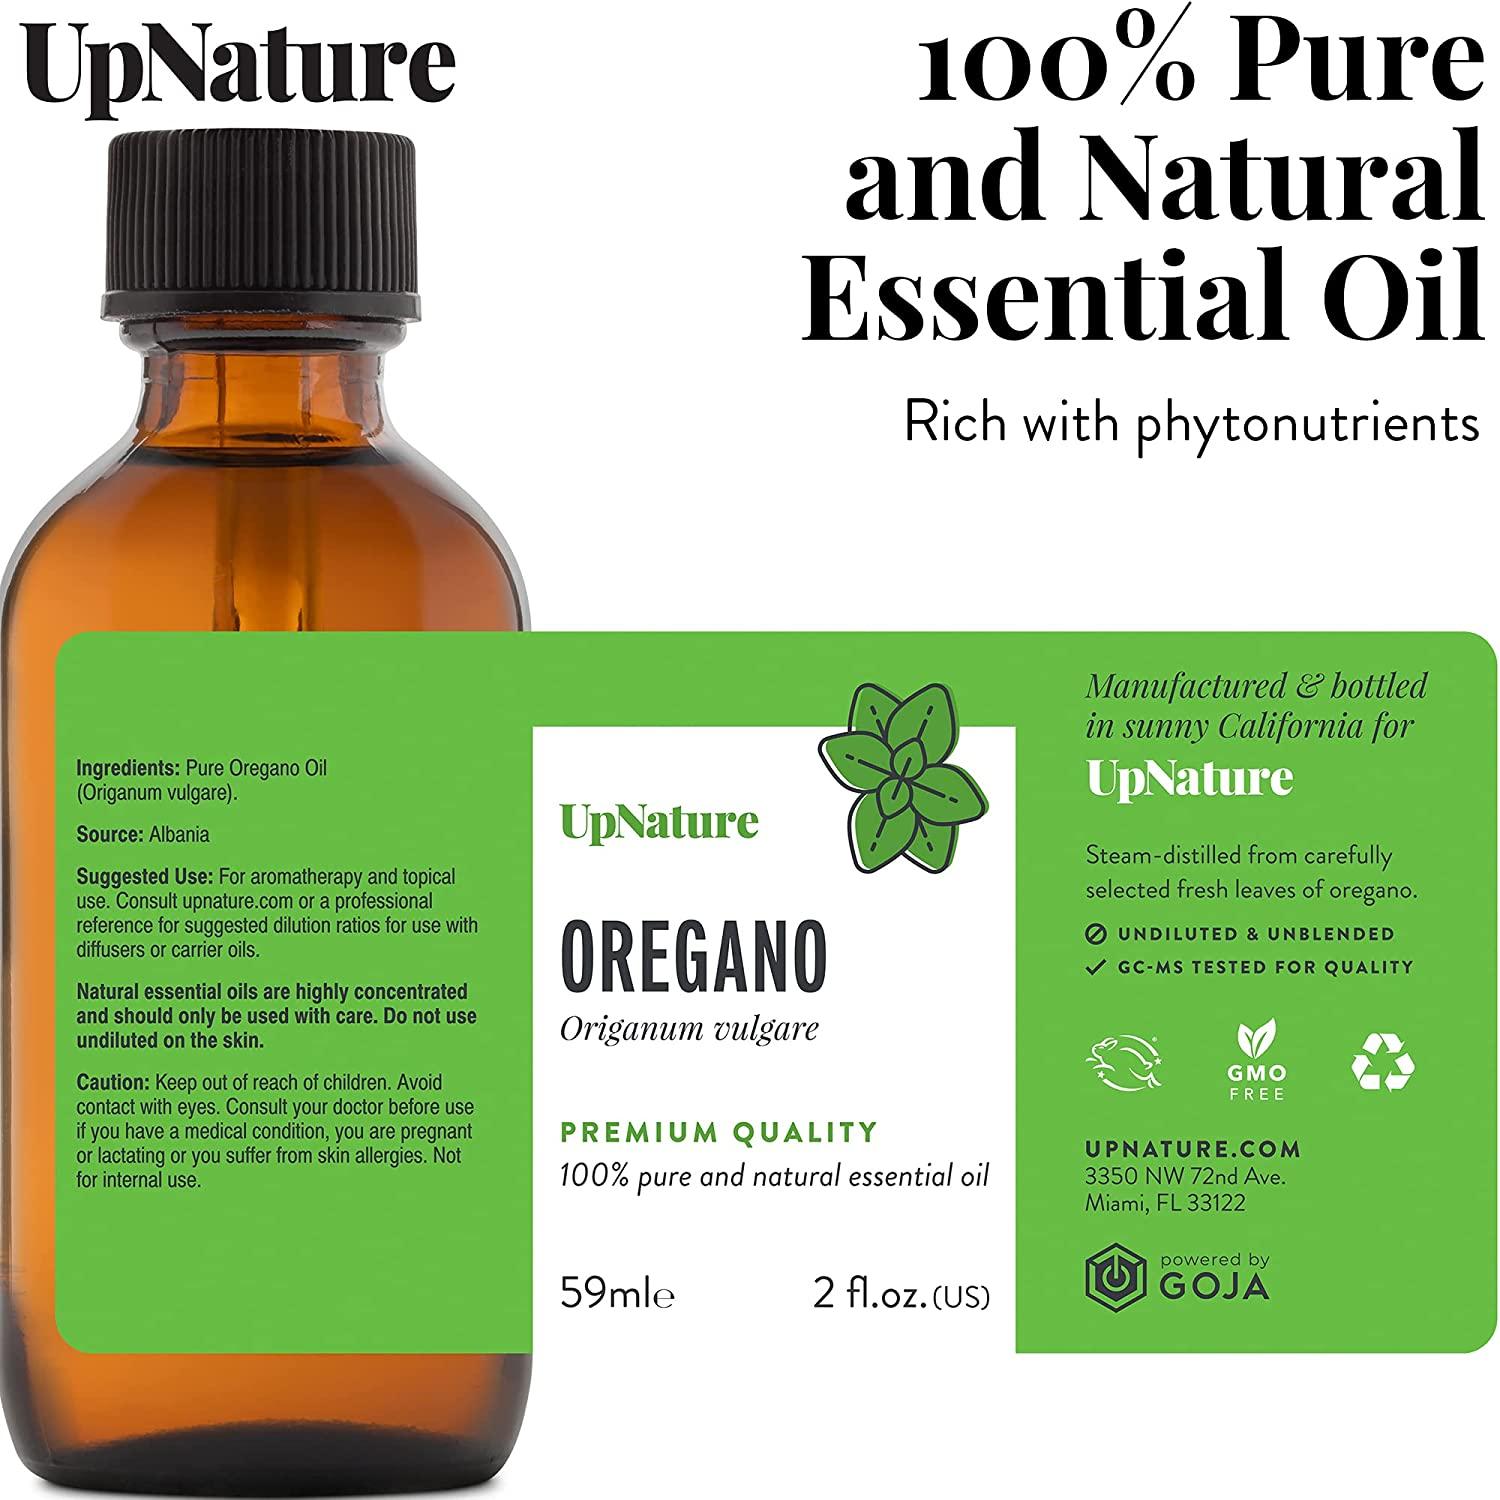 Oregano Essential Oil  Essential Oils and Healthy Lifestyle with